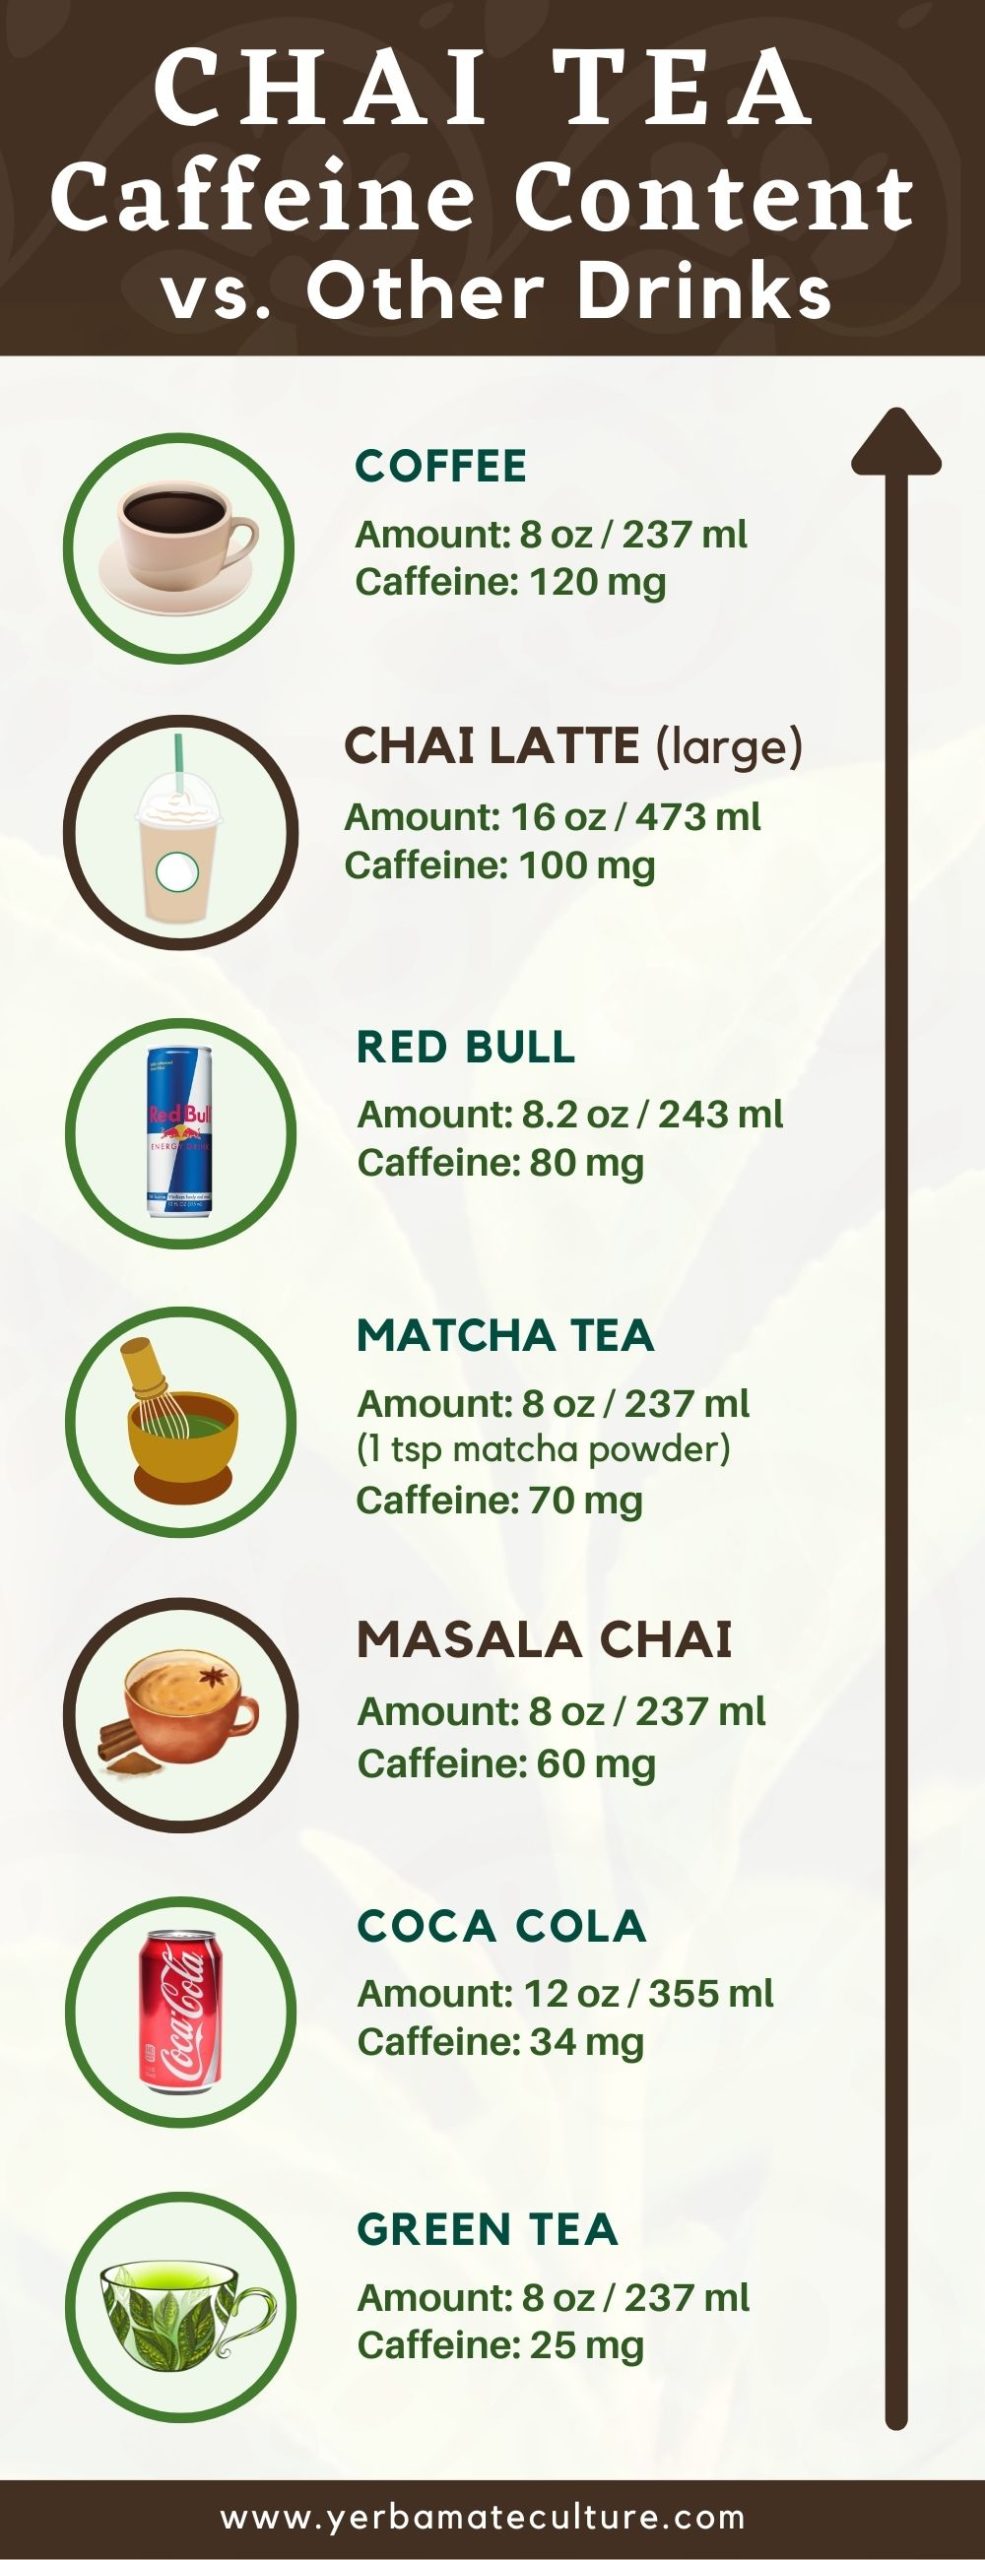 chai caffeine content vs coffee and other drinks